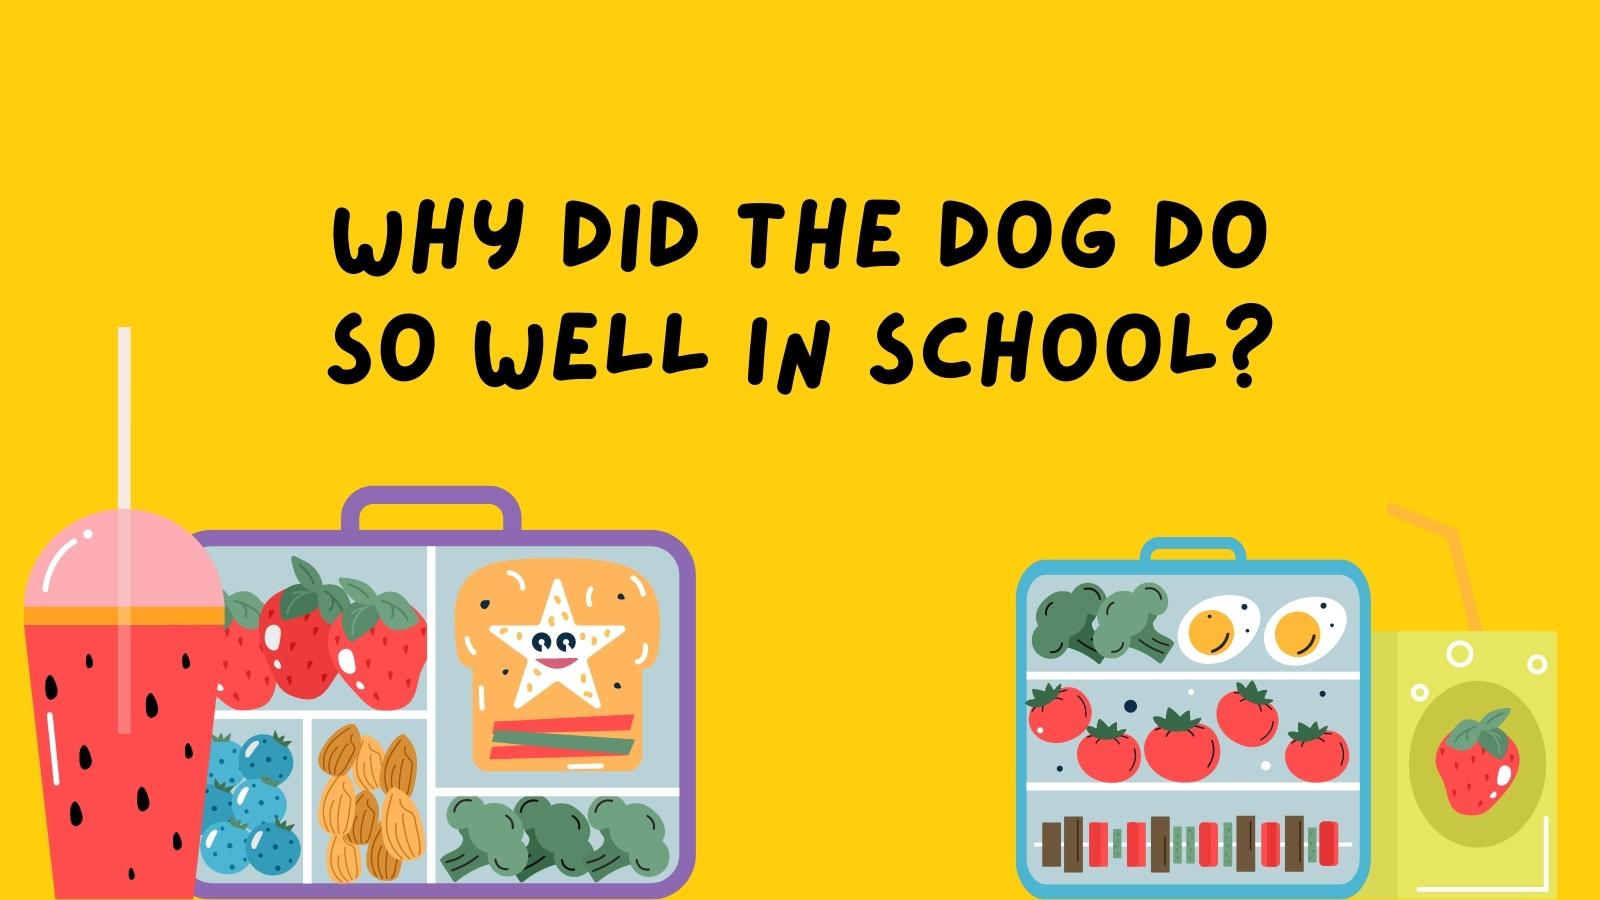 Why did the dog do so well in school?